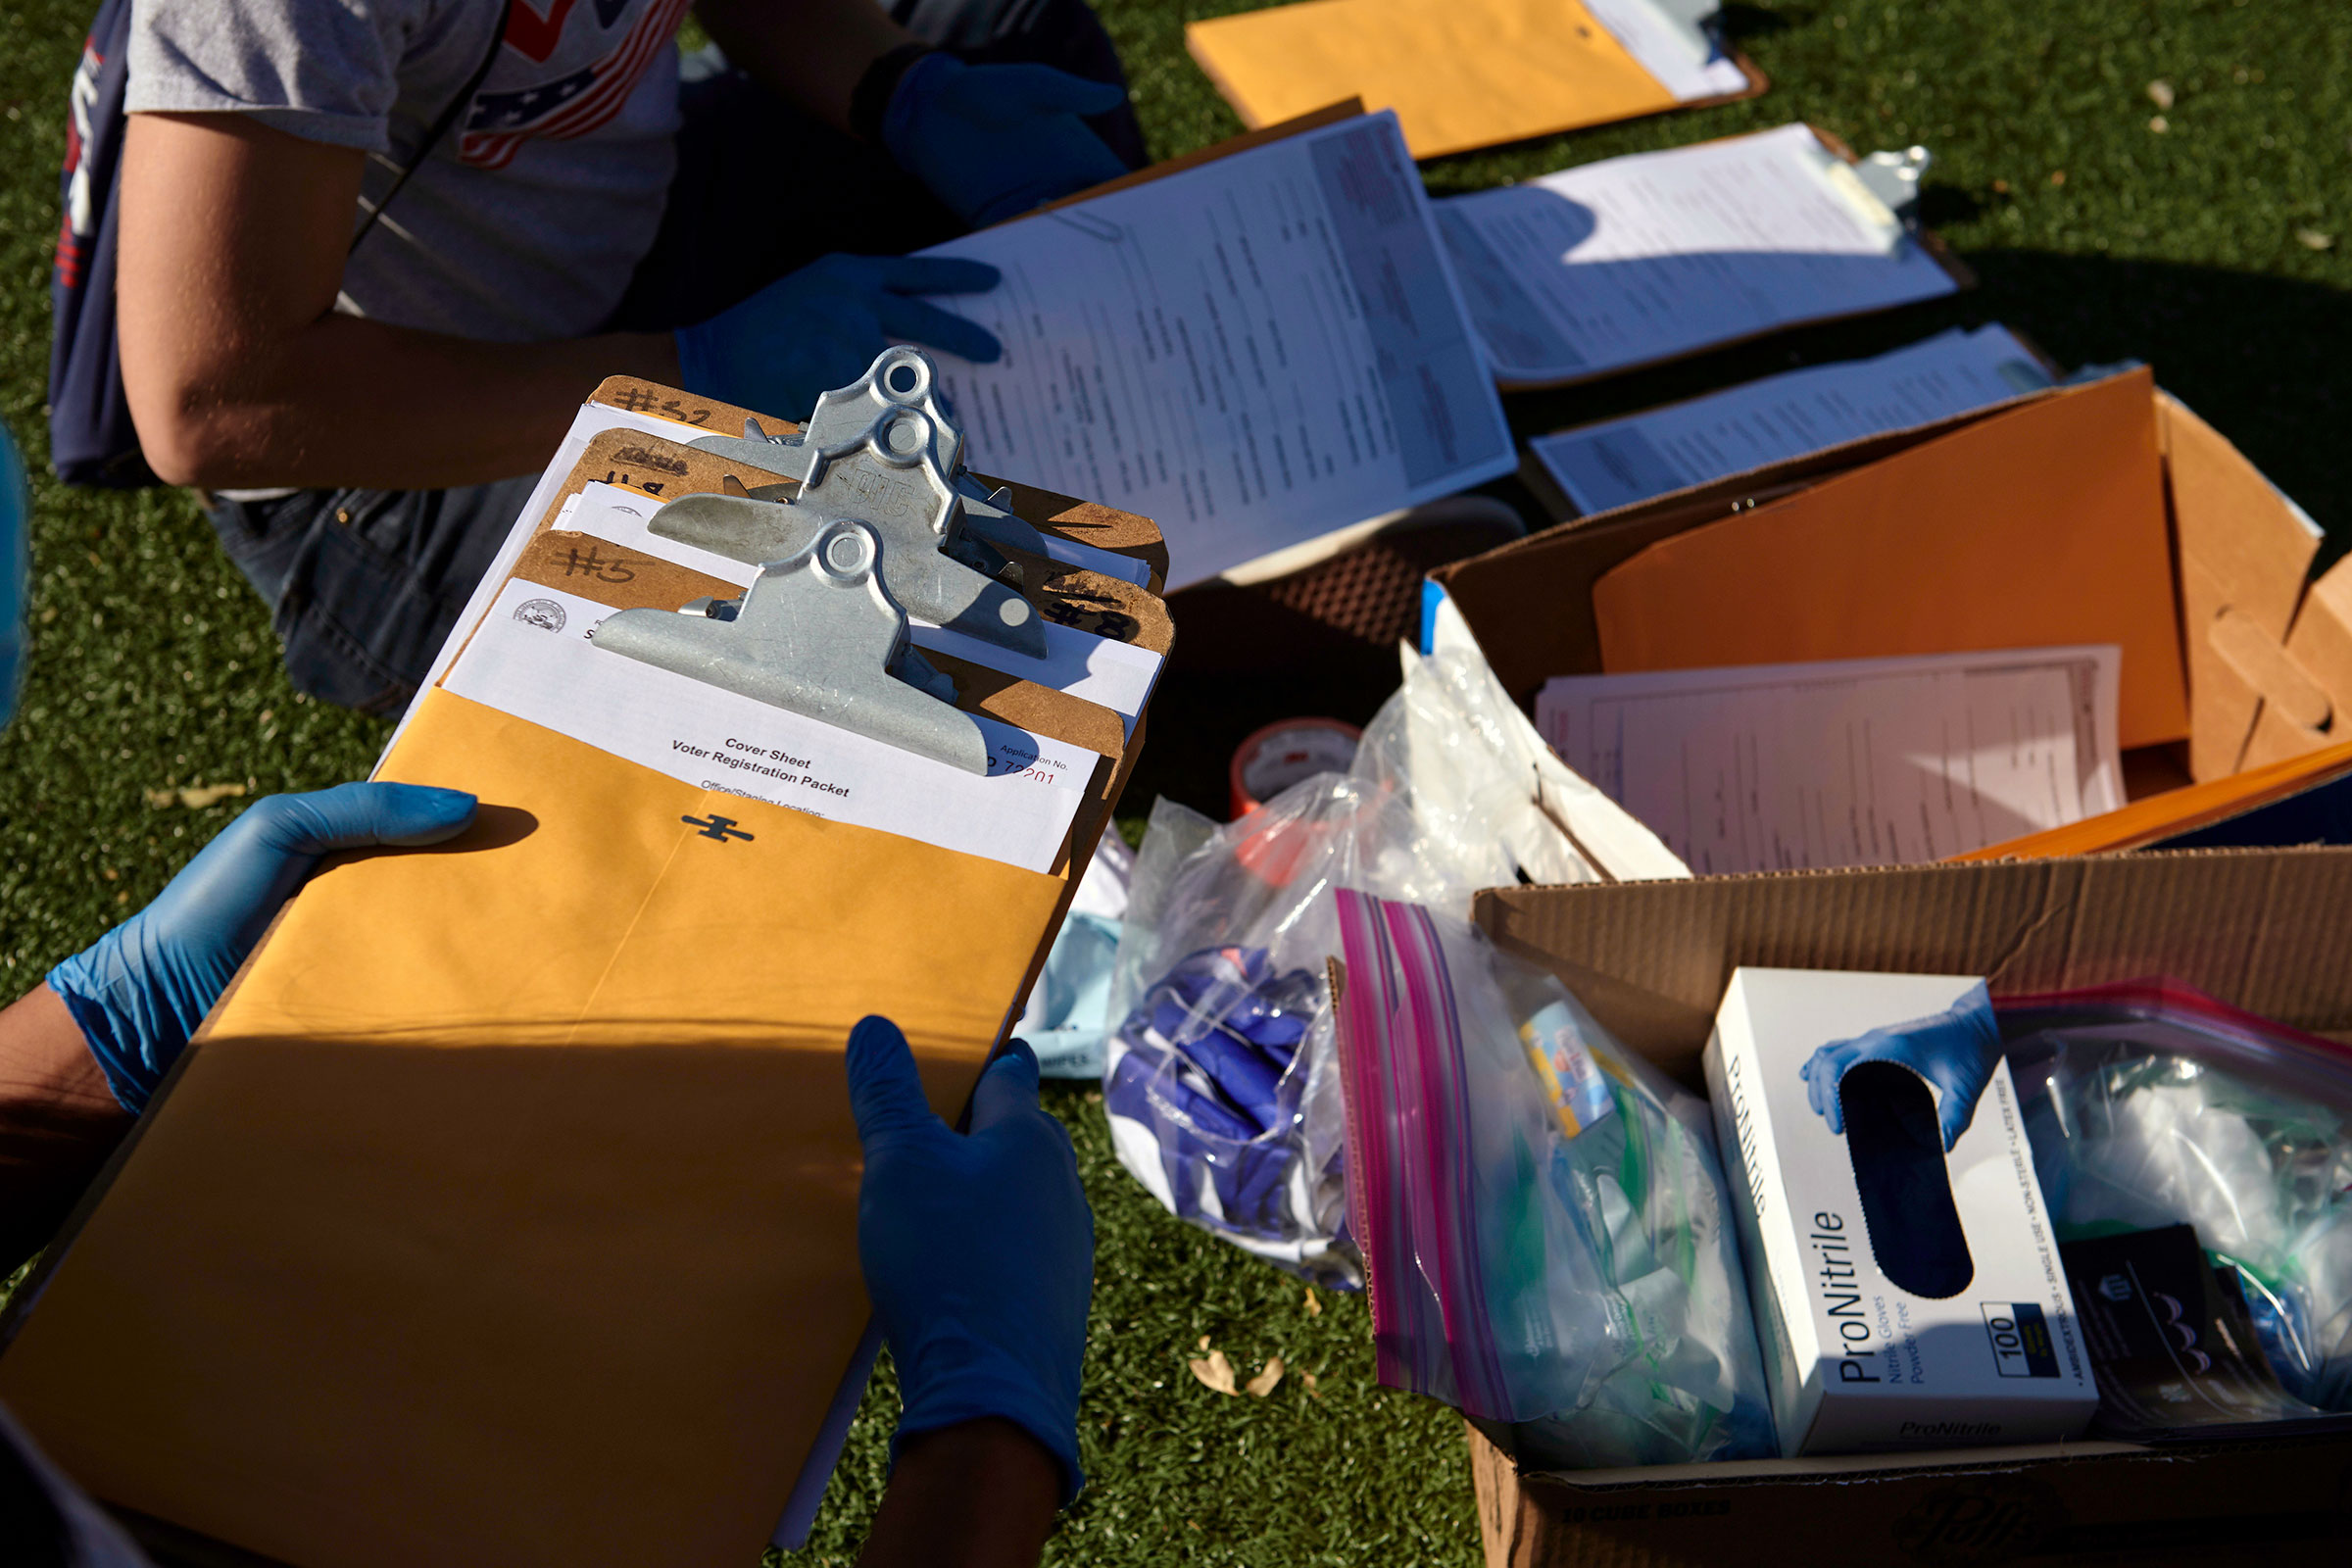 Mi Familia Vota workers organized their voter registration materials and personal protective equipment before canvassing in Las Vegas on Saturday, Sept. 12, 2020. (Bridget Bennett/The New York Times)